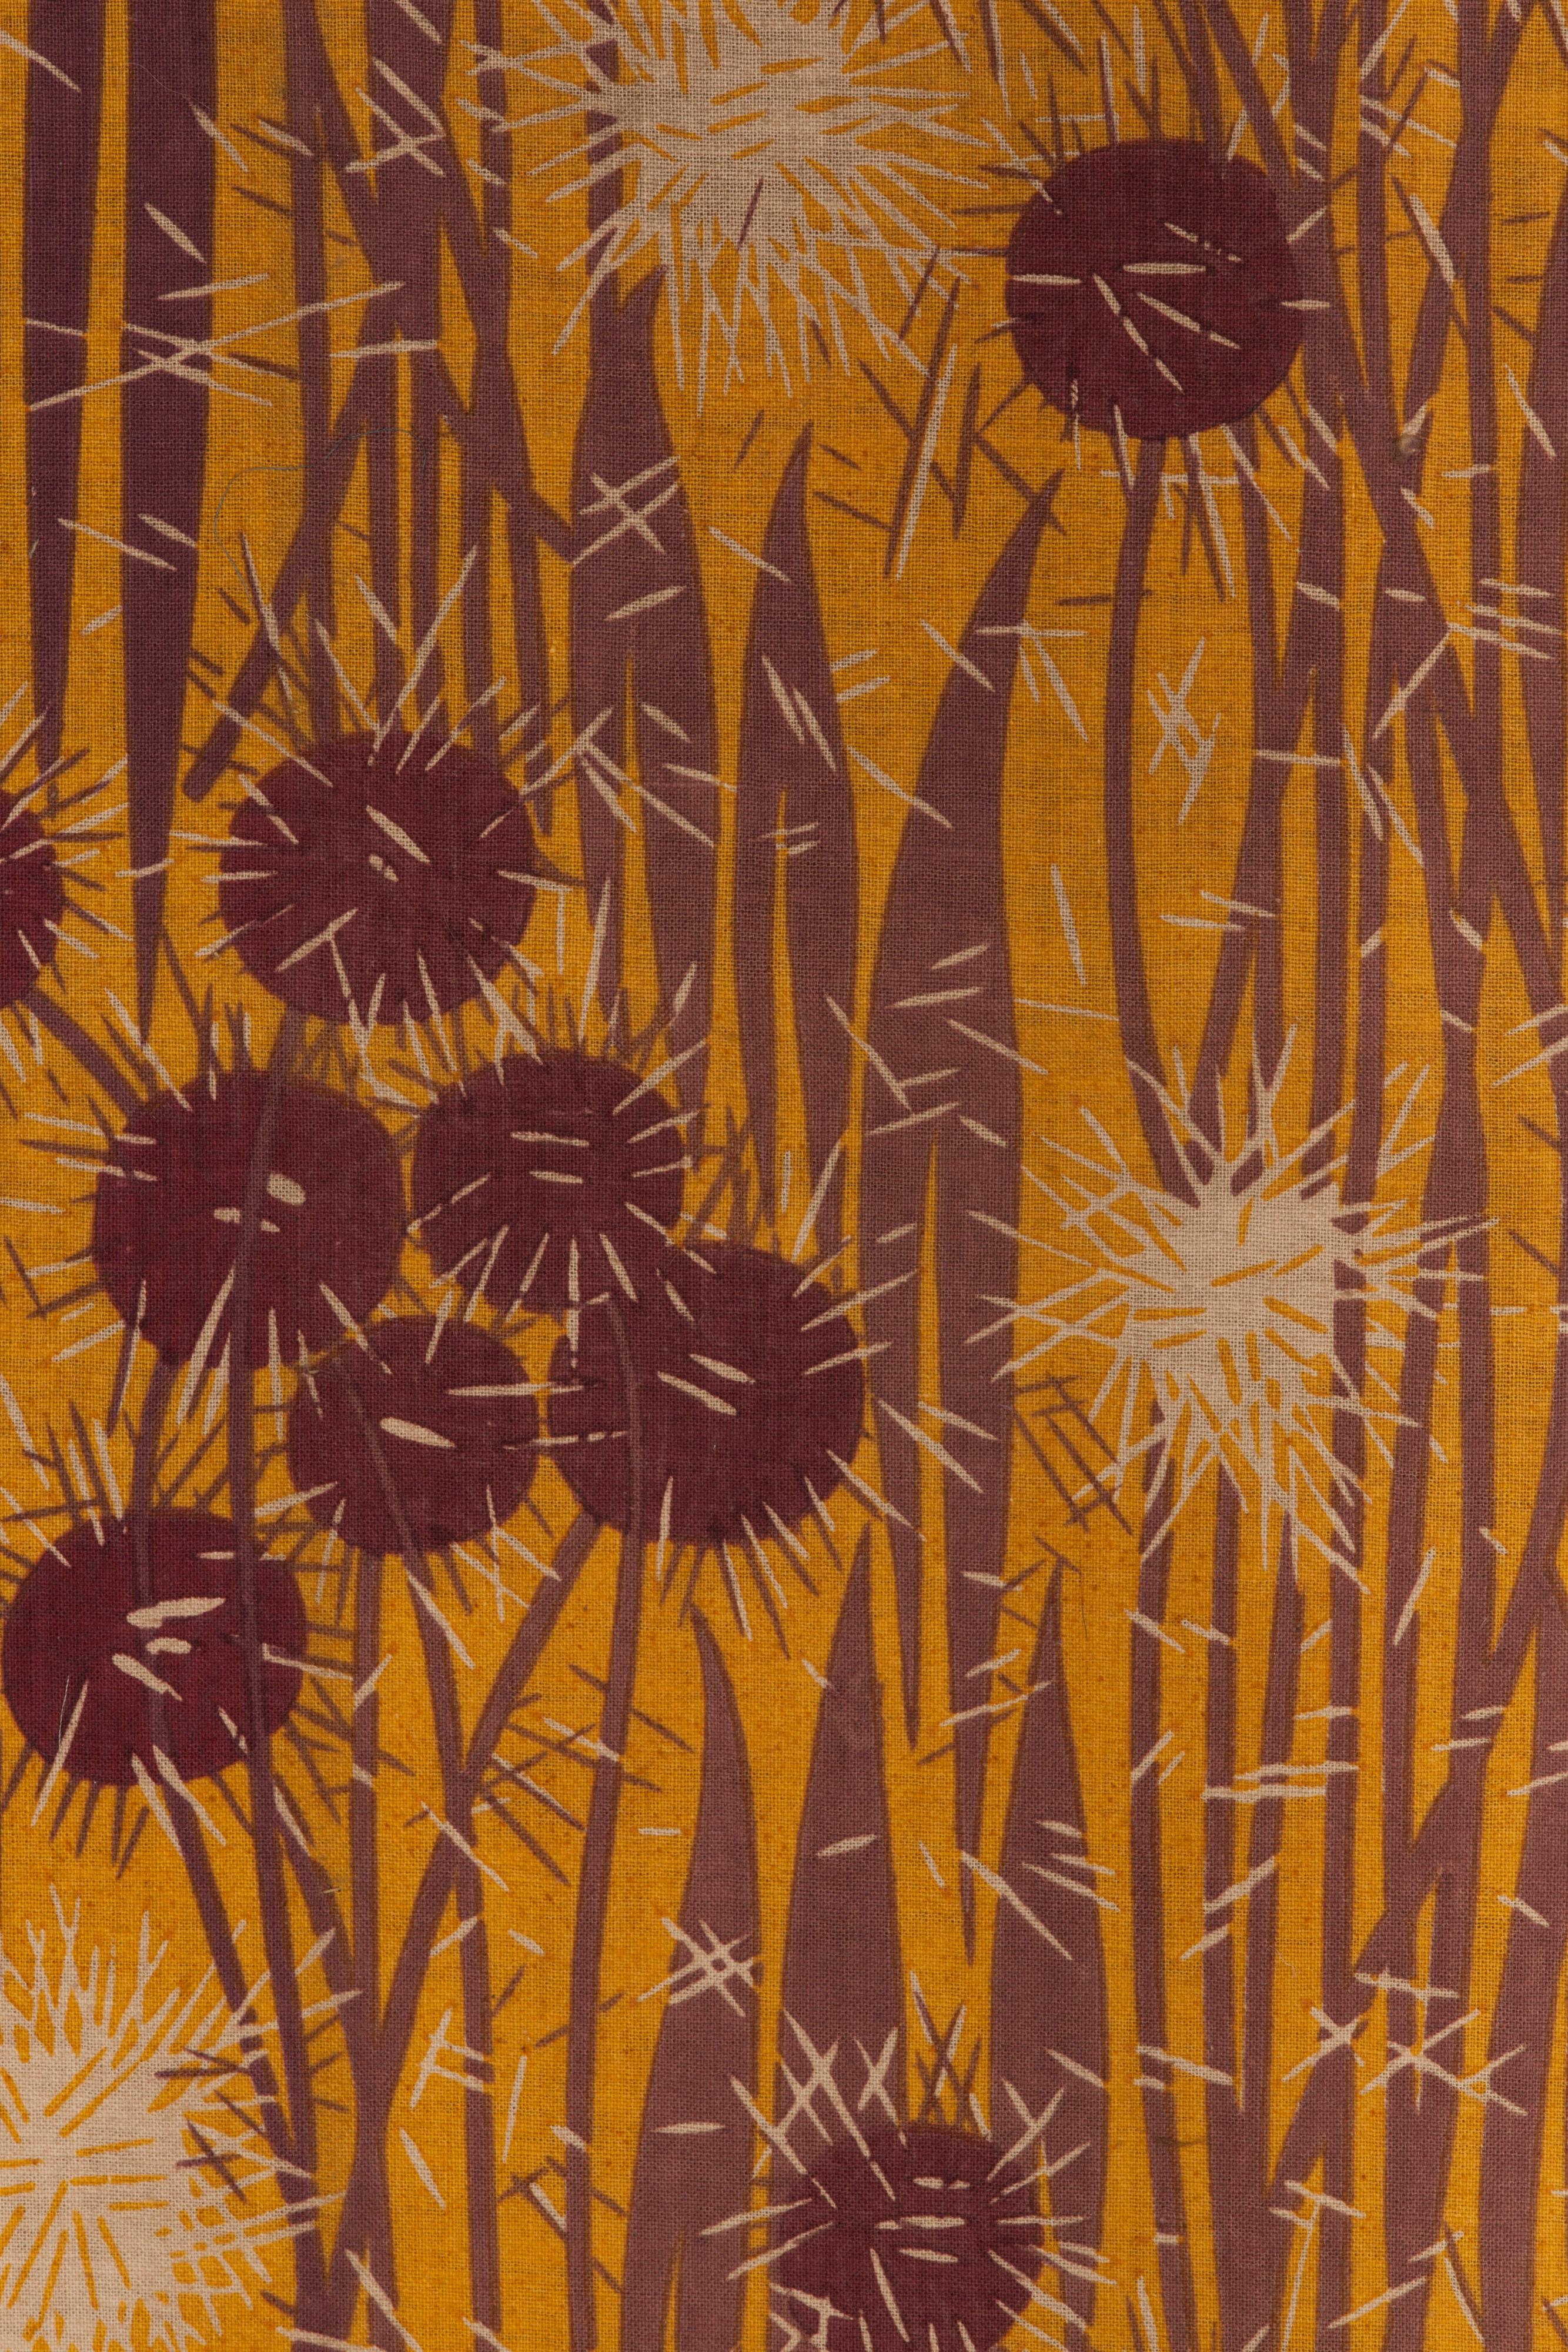 This pelmut for window or headboard features a typical art deco style of just 3 flat, high-contrast colors in a hand-screened printed thistle pattern. The curvelinear lower half is edged in short fringe.